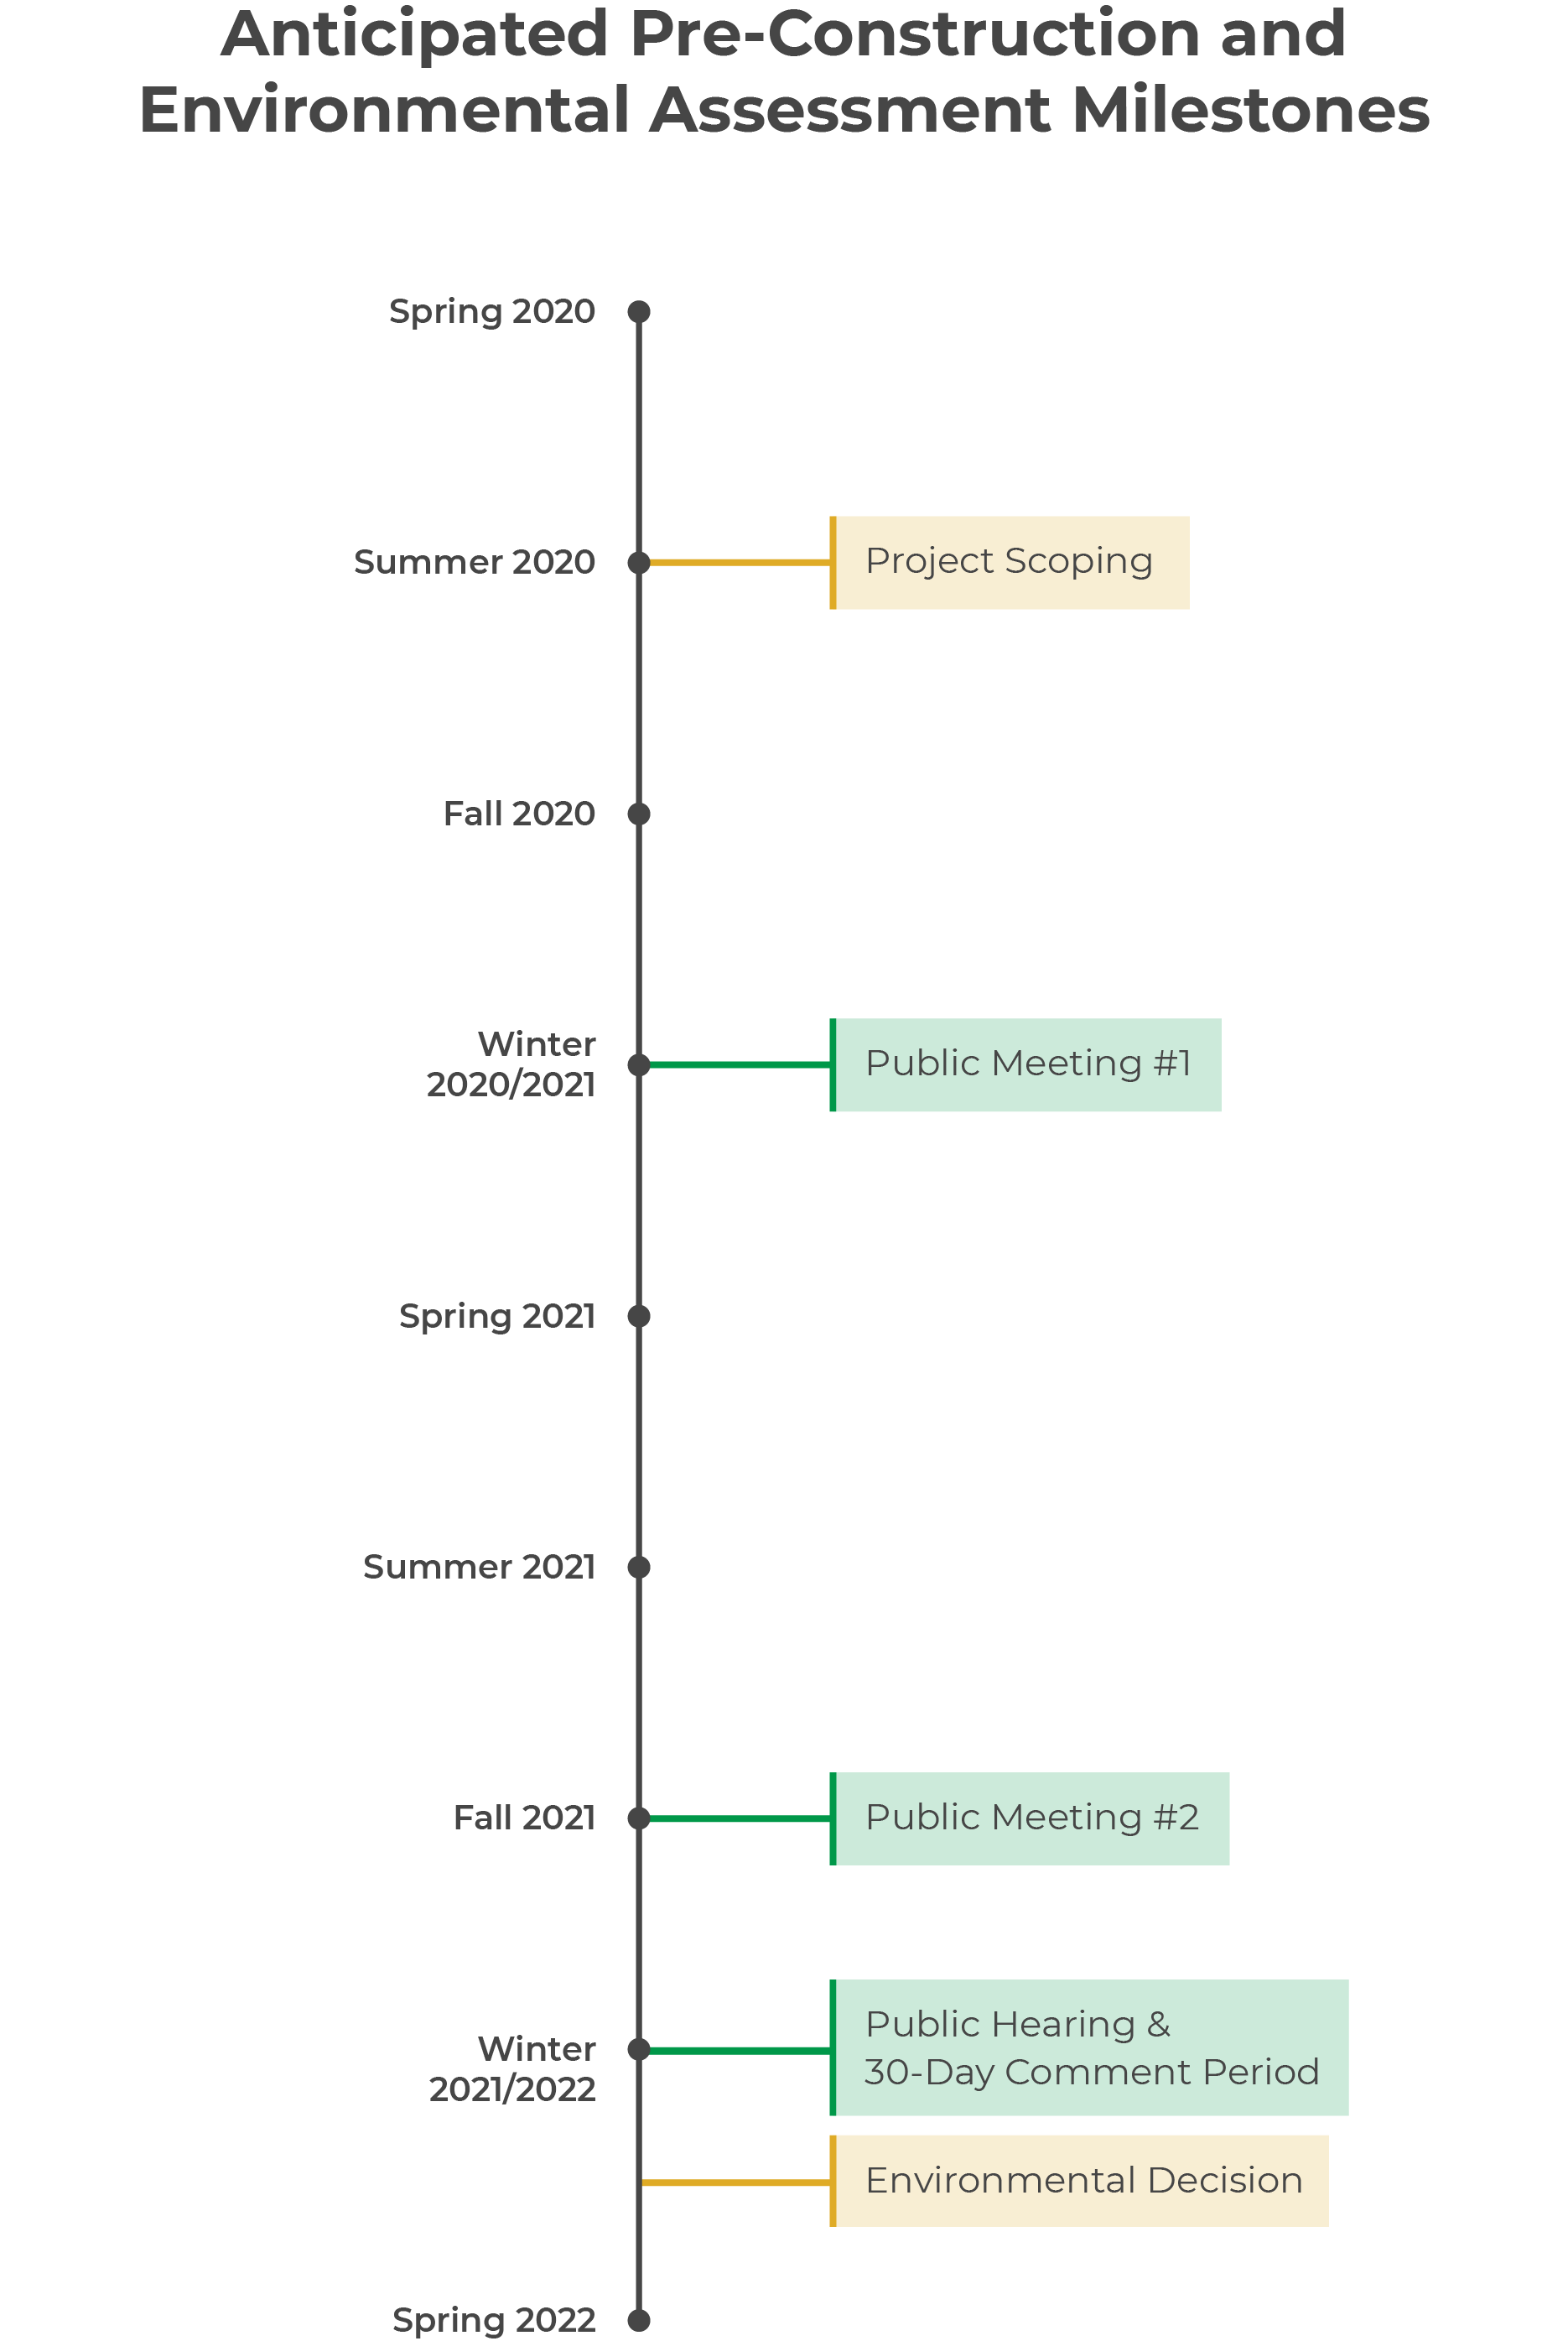 Timeline depicting project scoping in September 2020, first public meeting in winter 2020/2021, second public meeting in fall 2021, and th epublic hearing and 30-day comment period, as well as an environmental decision in winter 2021/2022.